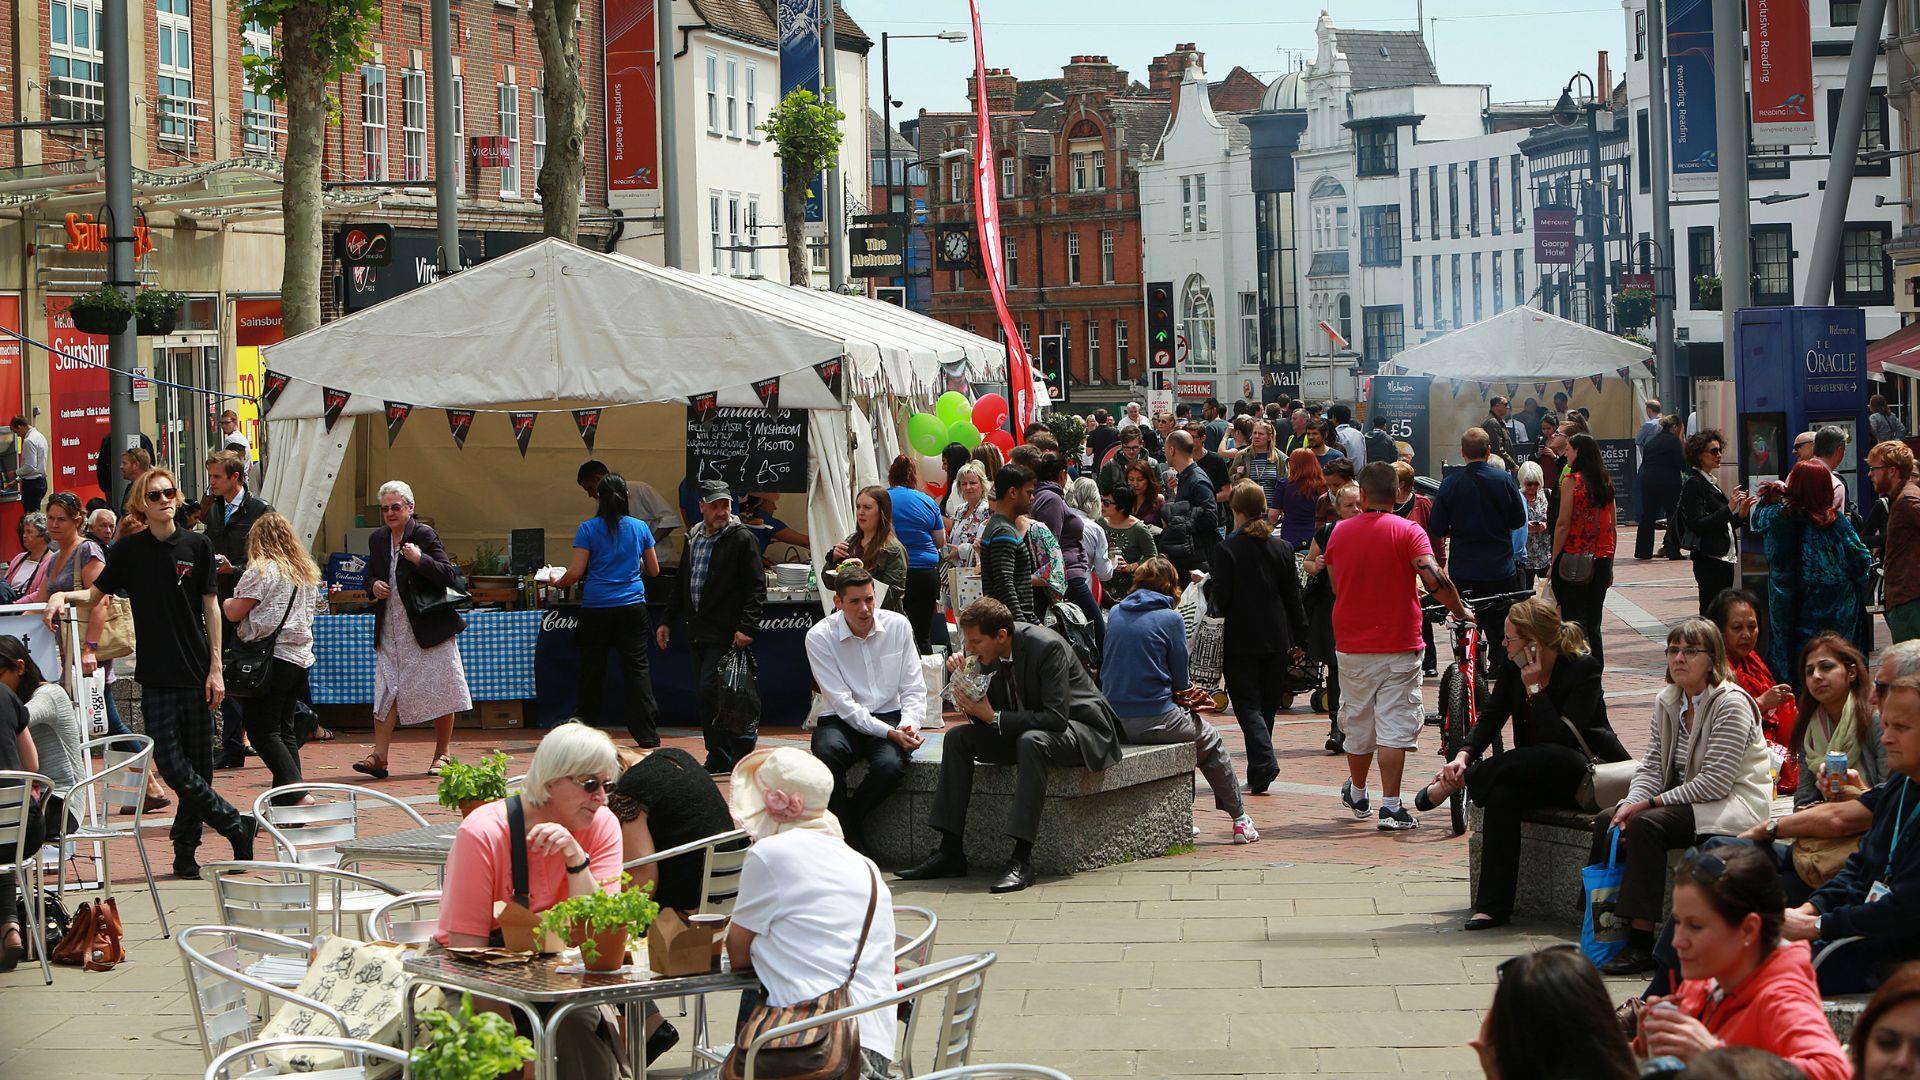 Crowds on Broad Street, Reading, at the Eat Reading street food festival